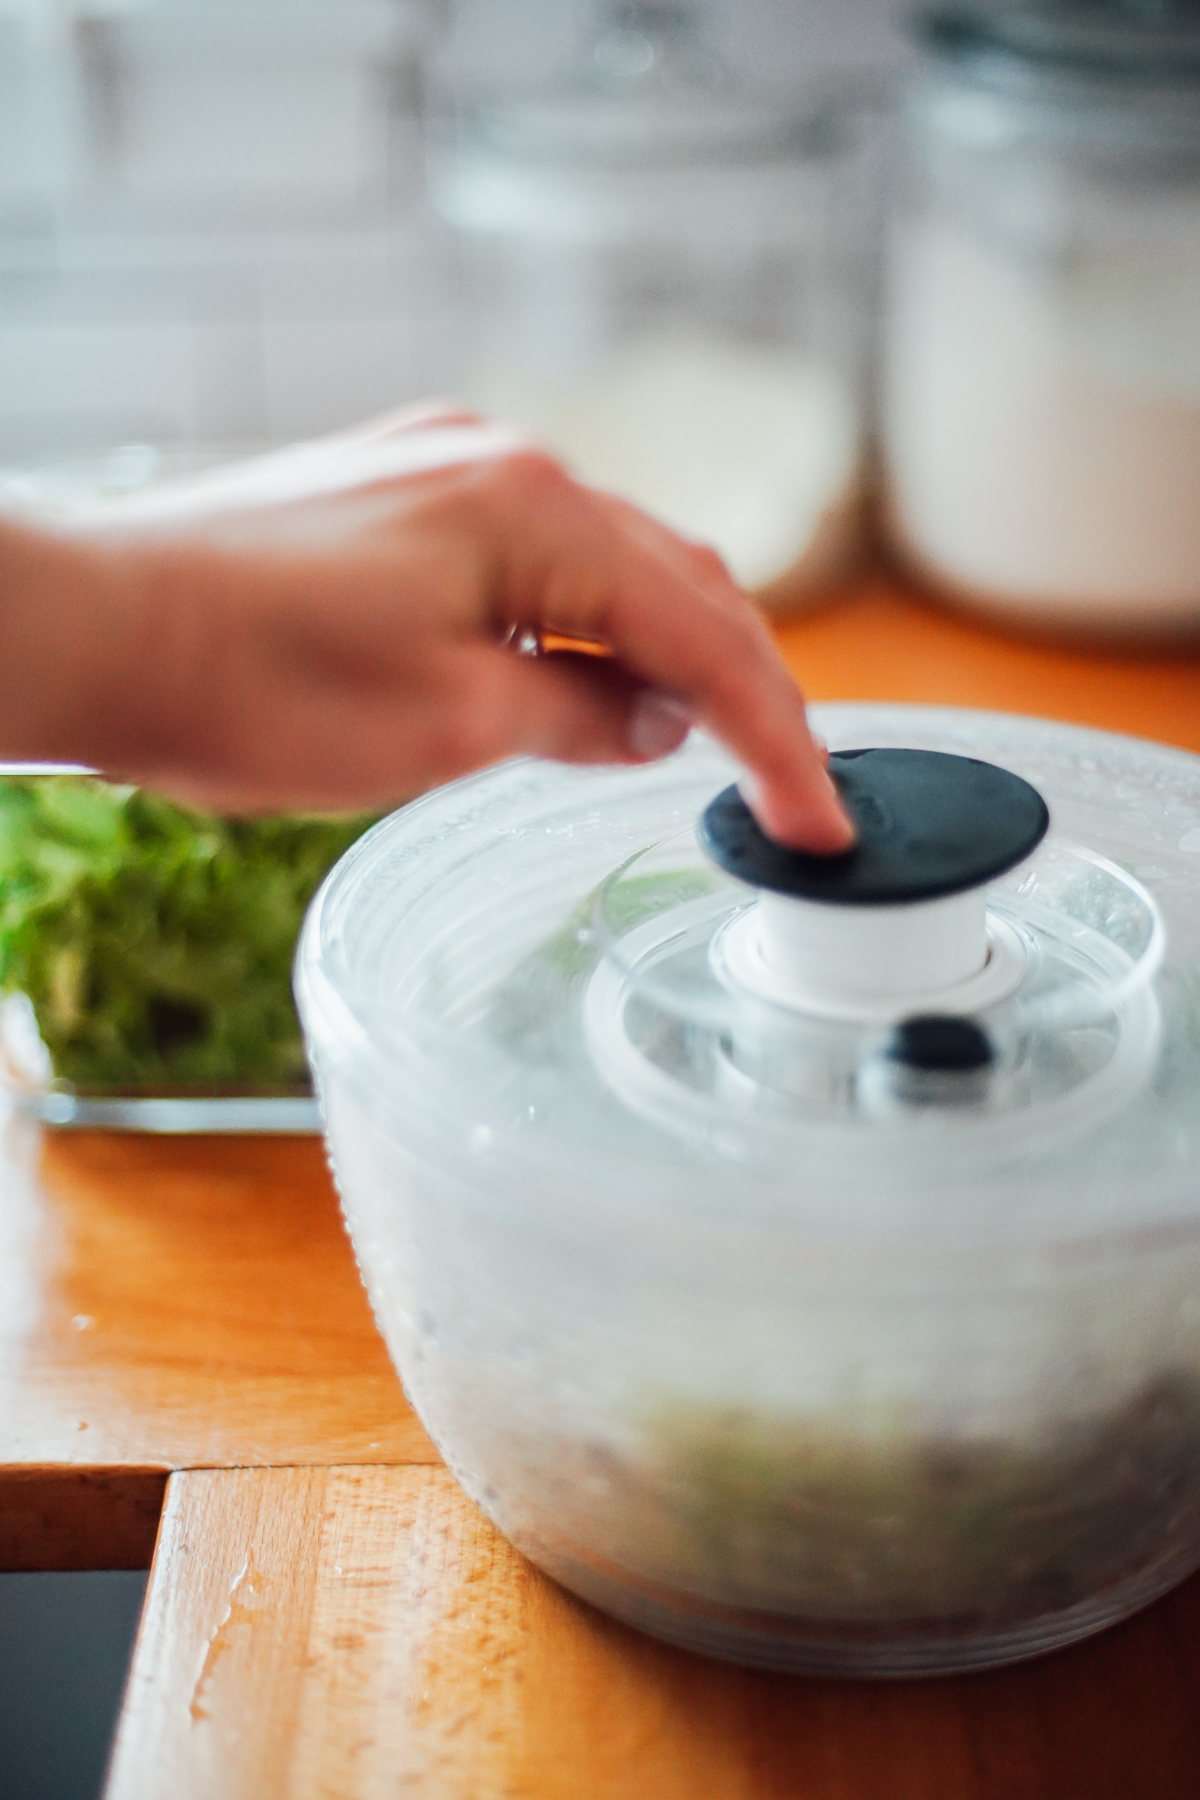 Drying cilantro in a salad spinner on the kitchen counter.